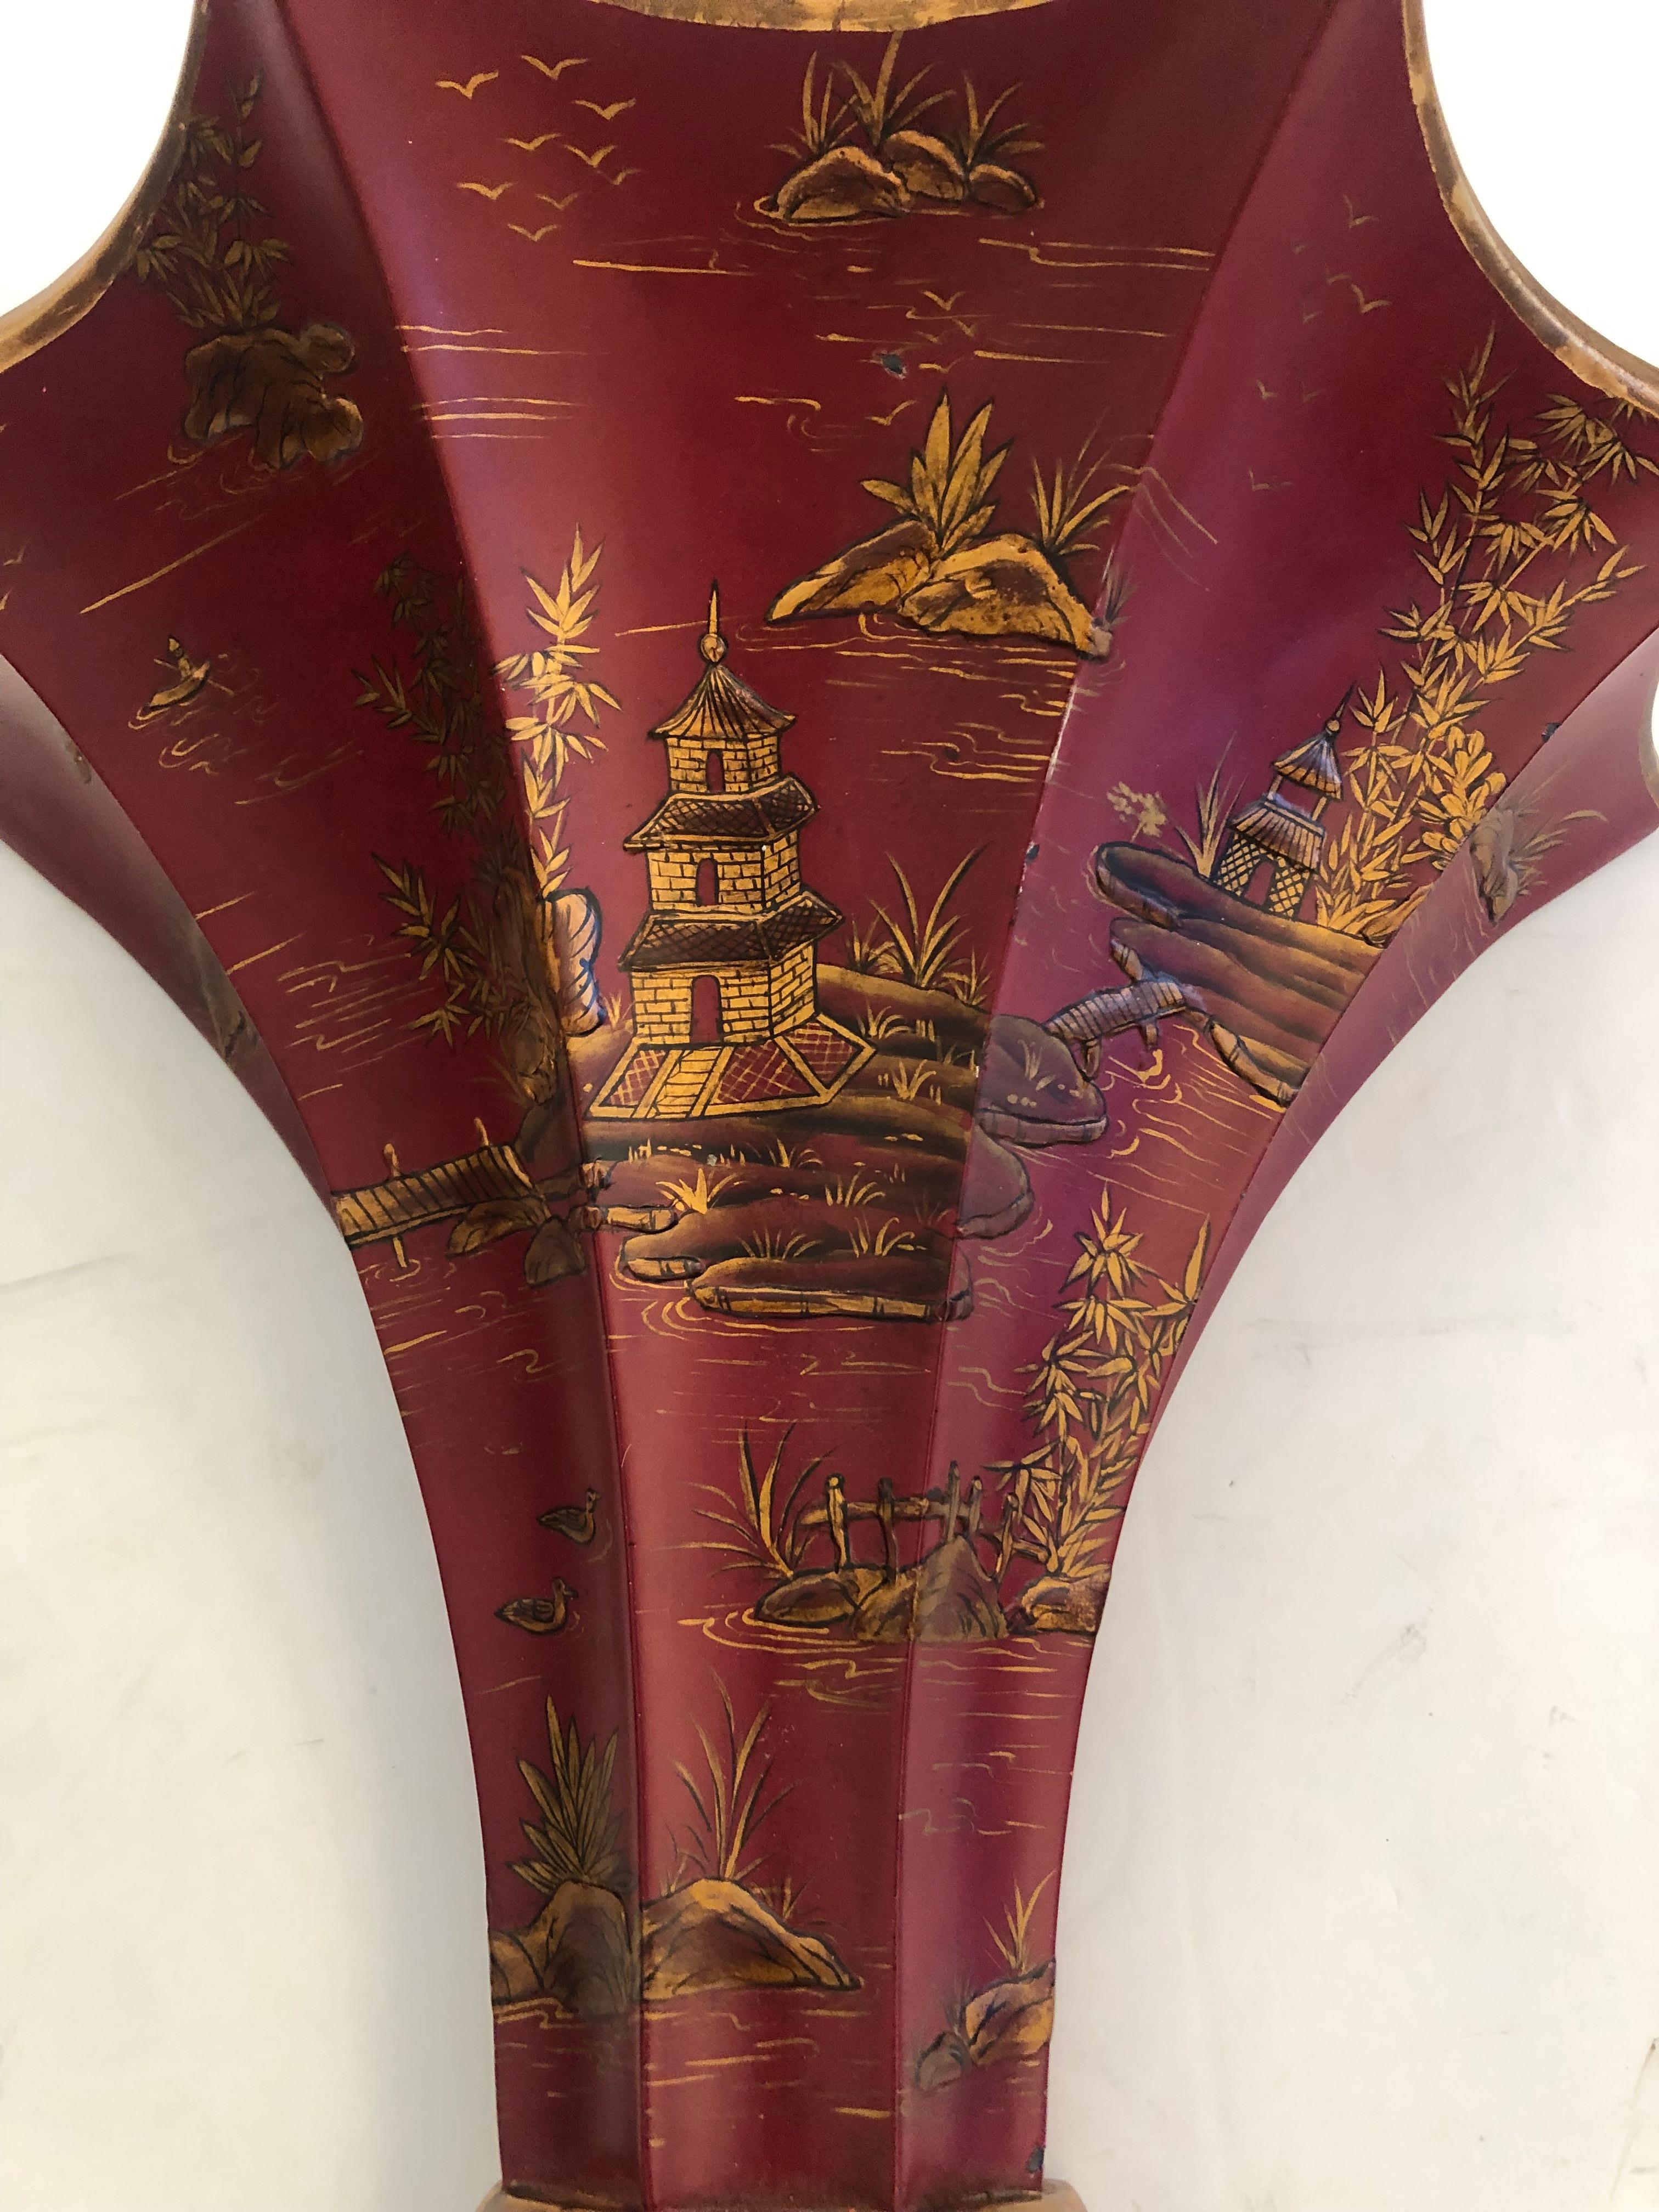 Large decorative pair of chinoiserie fluted wall brackets or sconces in a marvelous shade of red having black figural painting and gold flourishes. The interiors are hollow so could contain dried flowers or such.